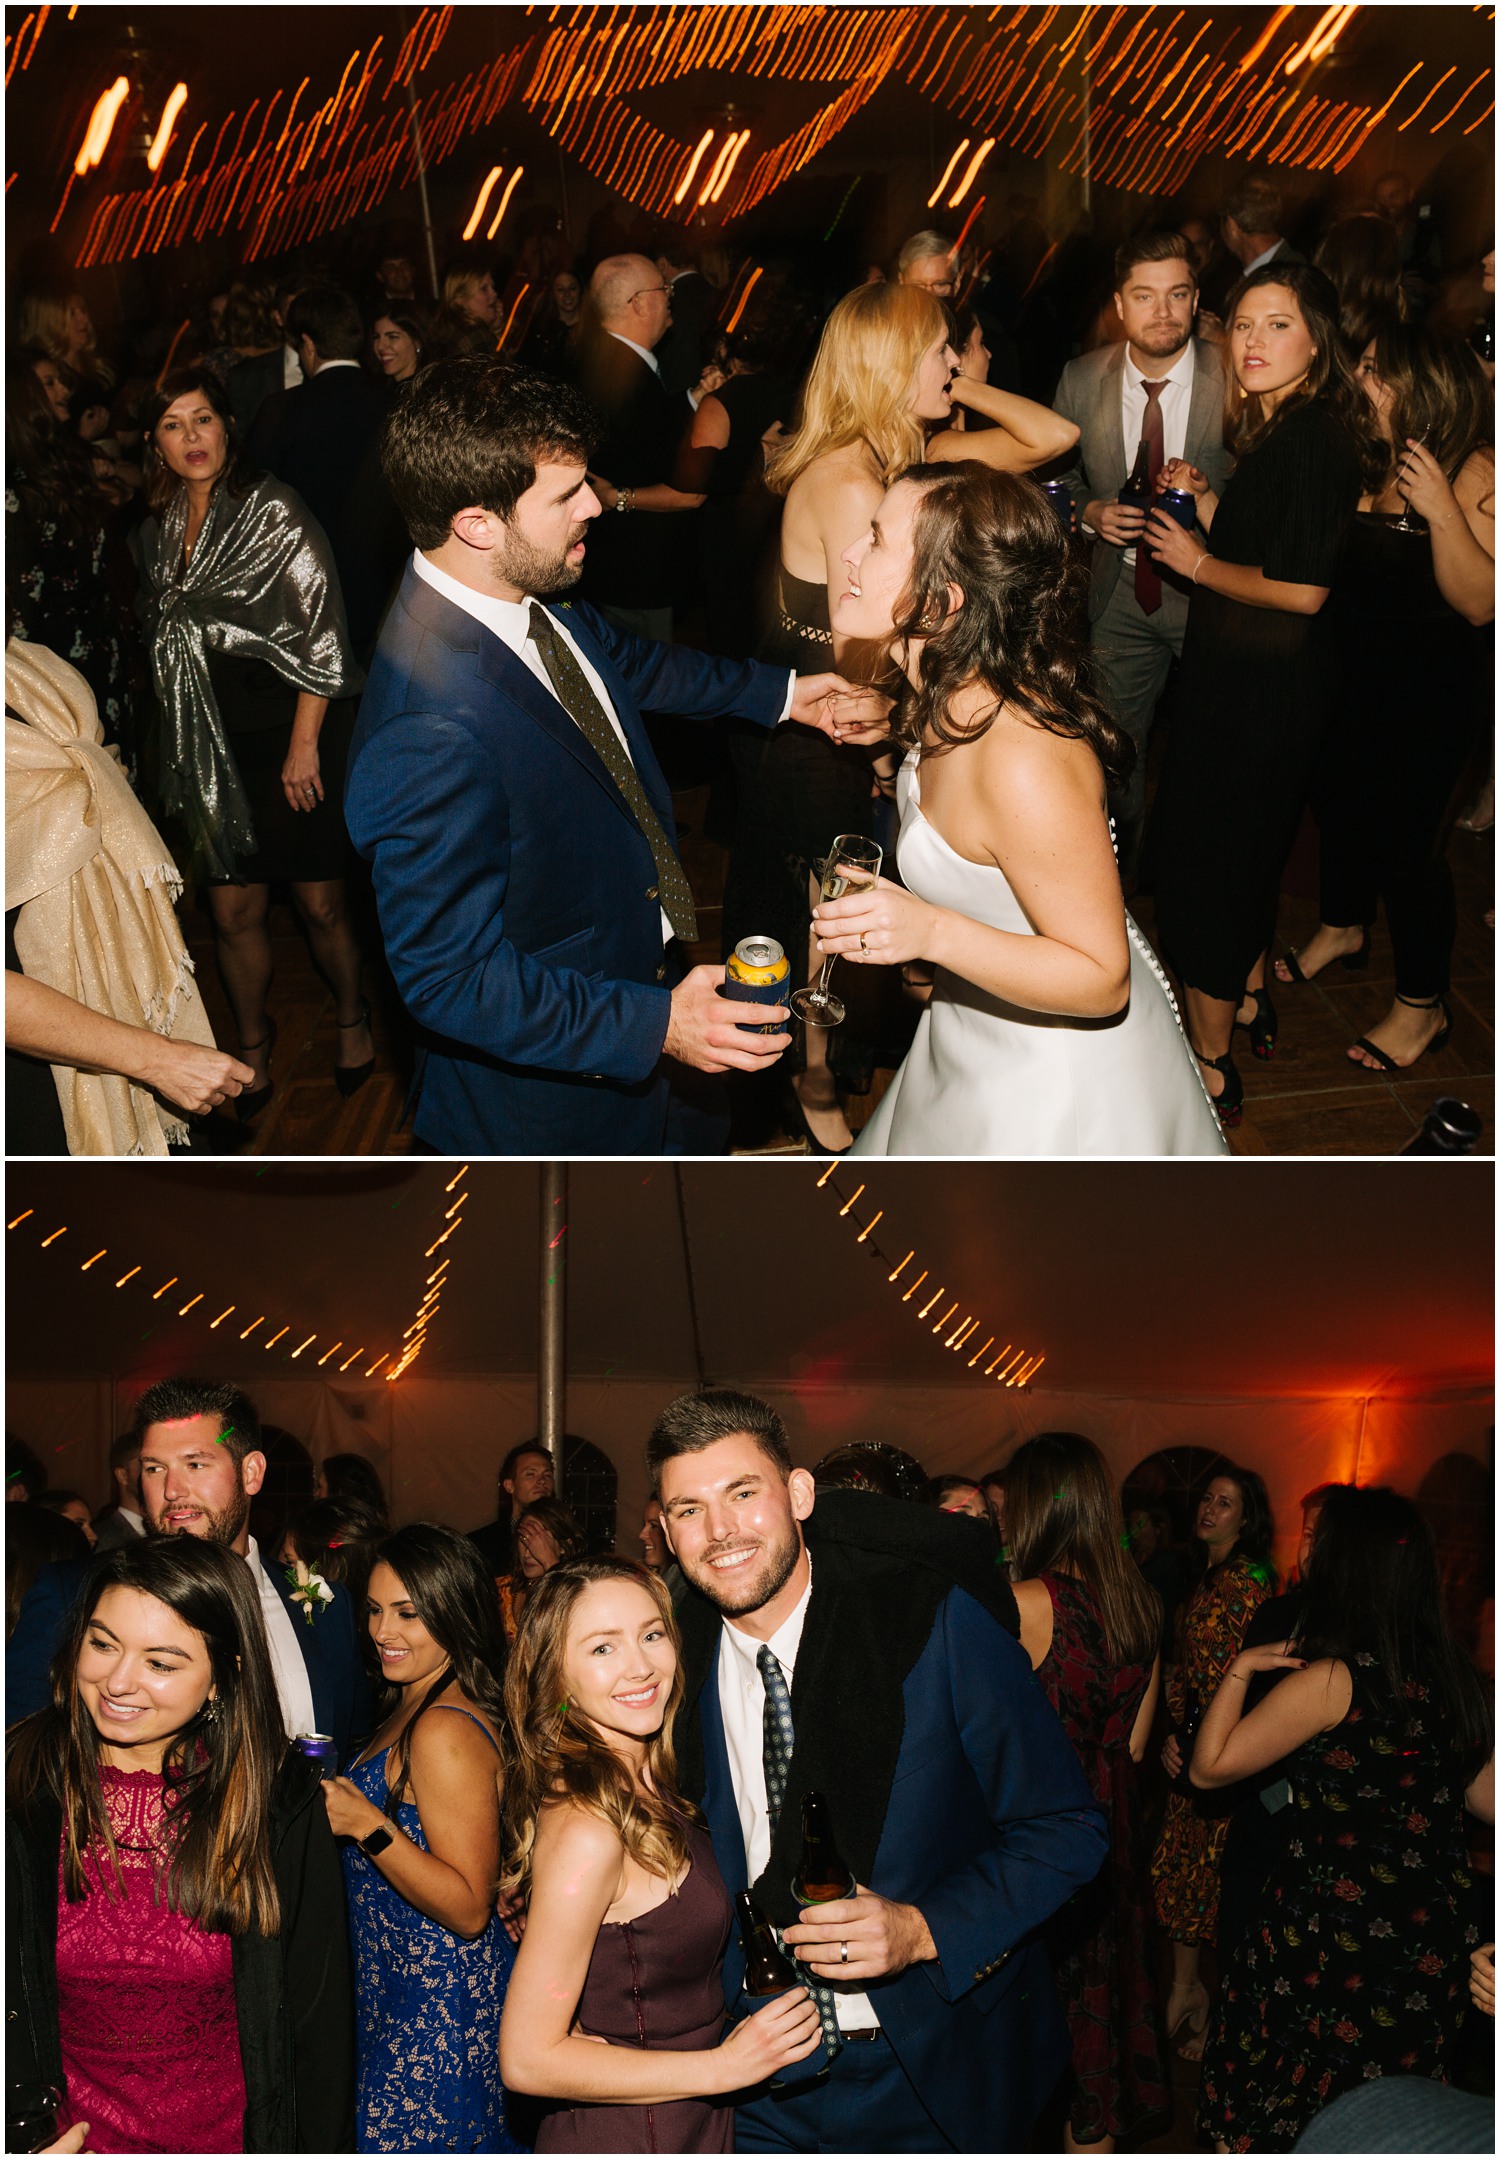 Asheville NC wedding reception photographed by Chelsea Renay